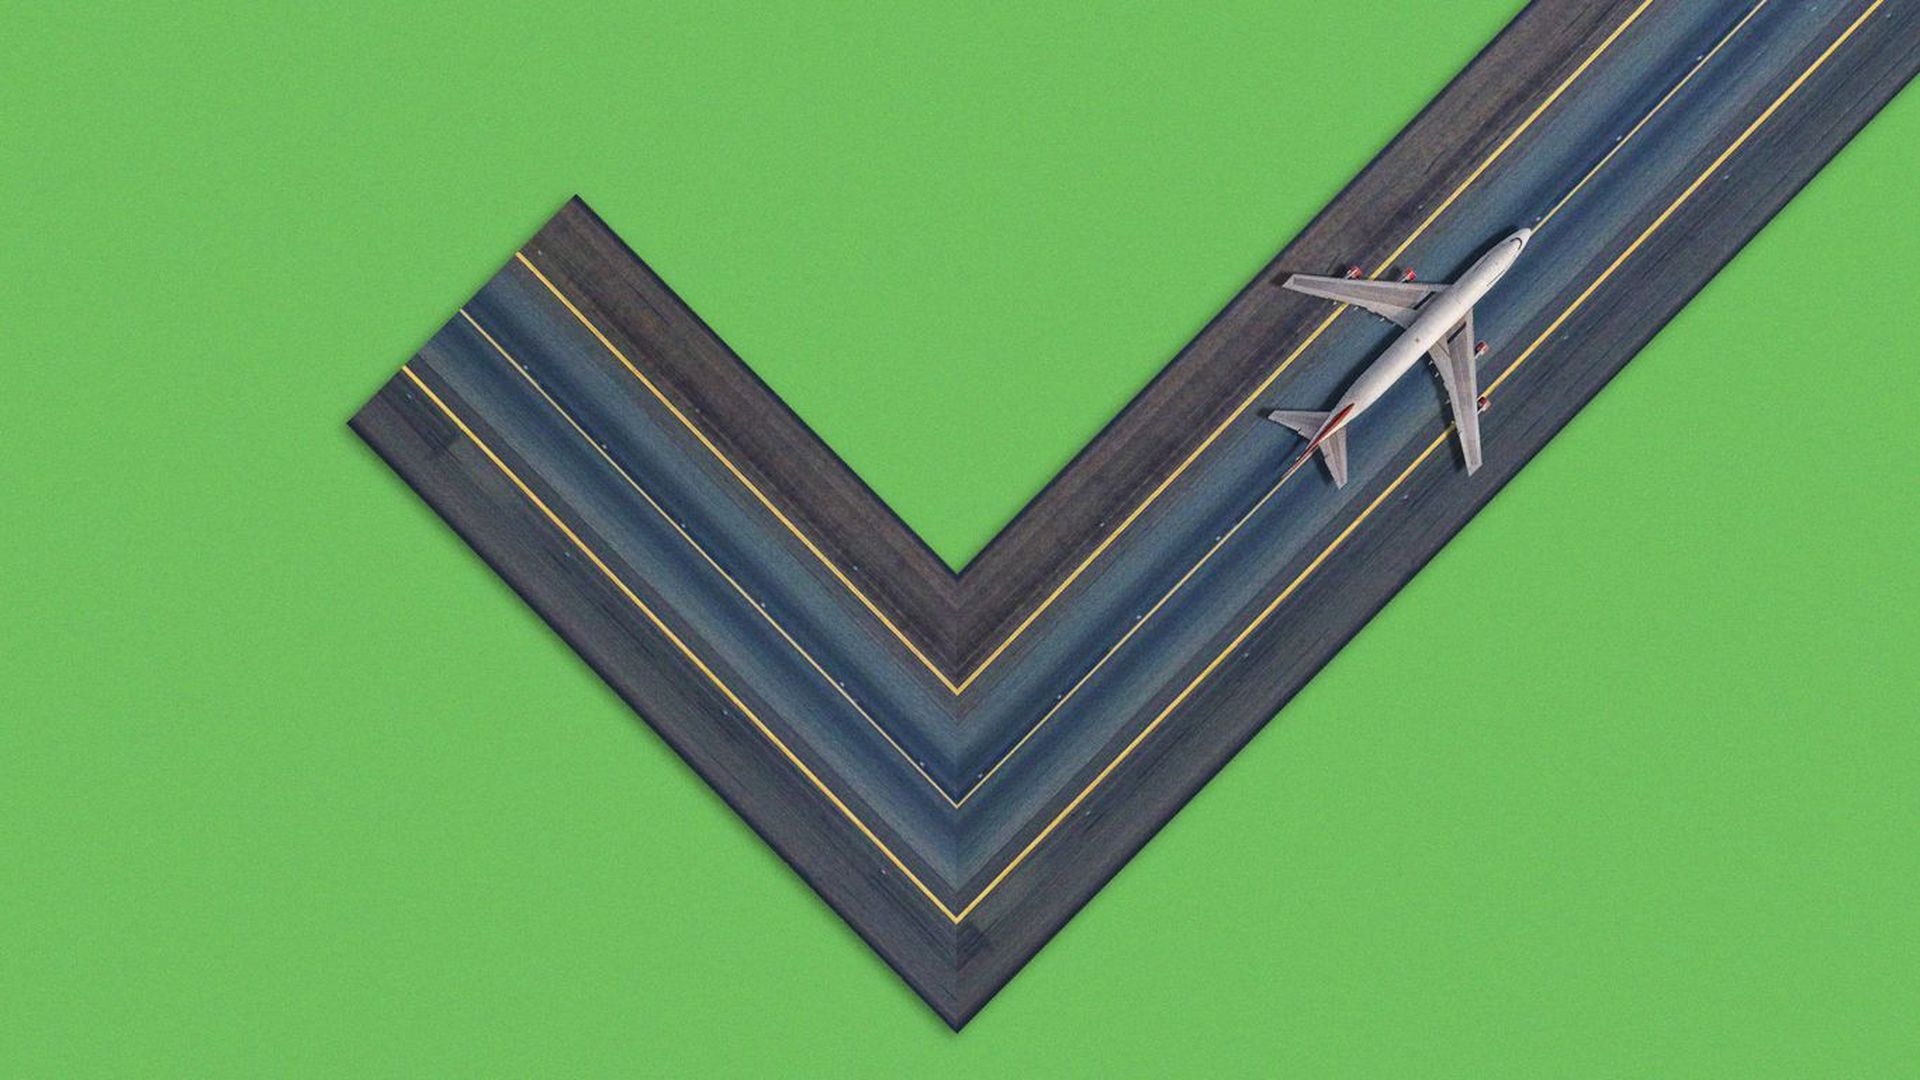 A check mark runway with a plane